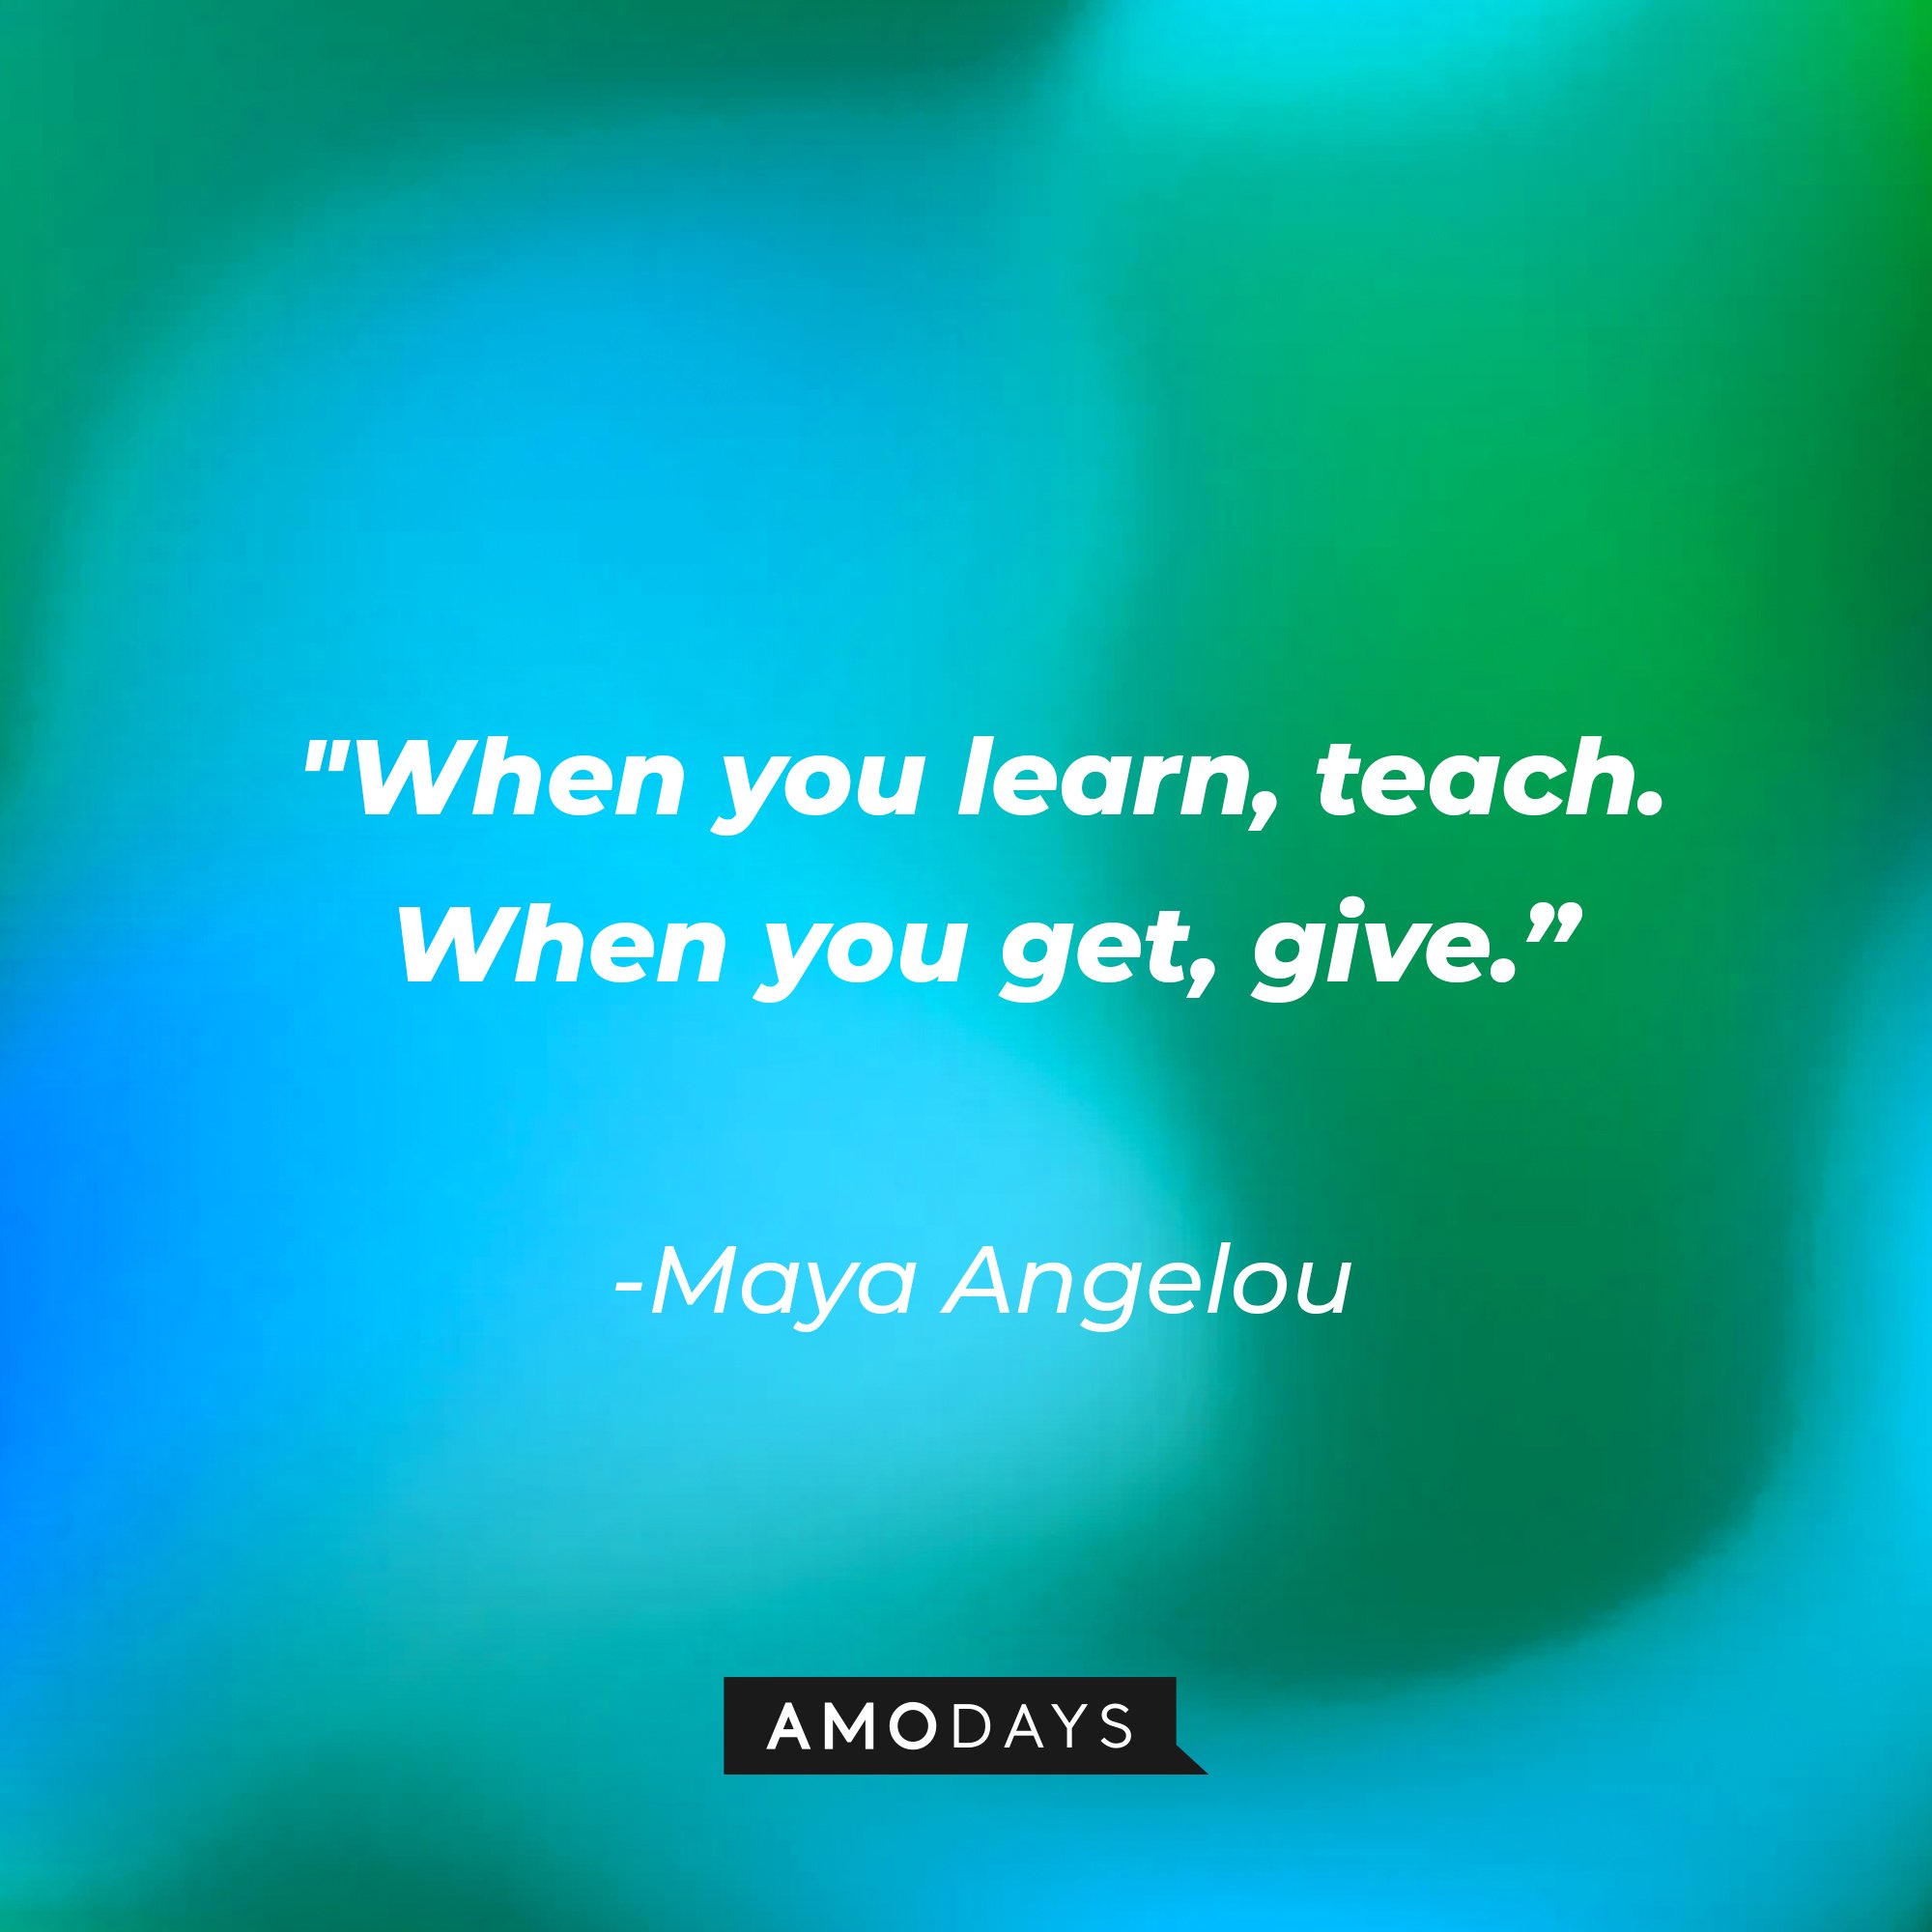 Maya Angelou’s quote: "When you learn, teach. When you get, give.” | Image: AmoDays